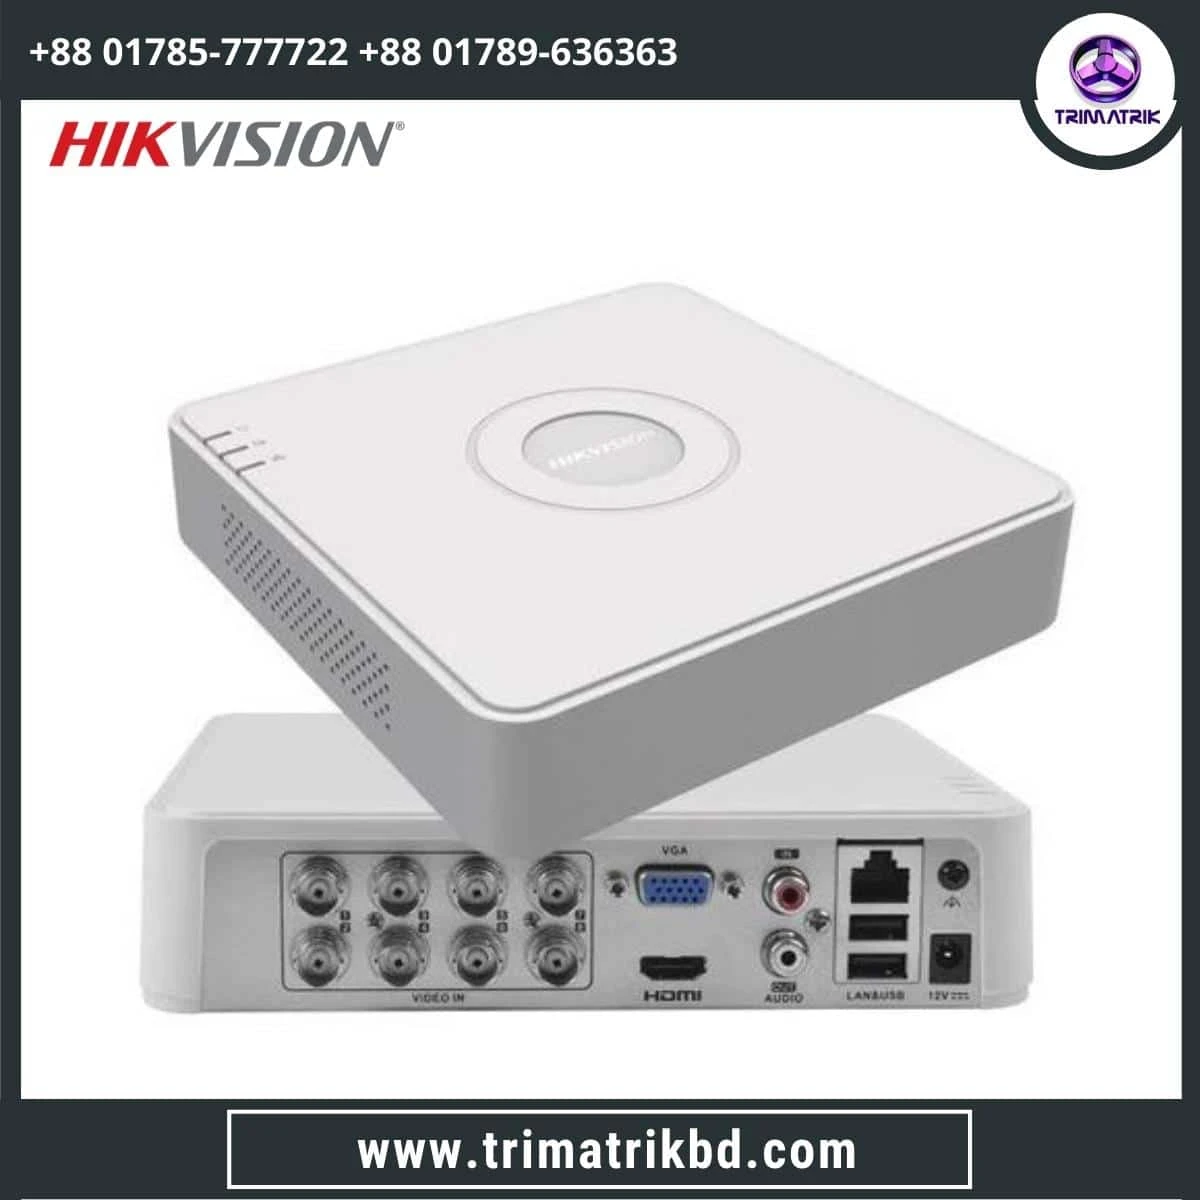 Hikvision DS-7108HGHI-K1 8-CH 1-Sata HDDs Turbo HD Video Recording DVR/XVR